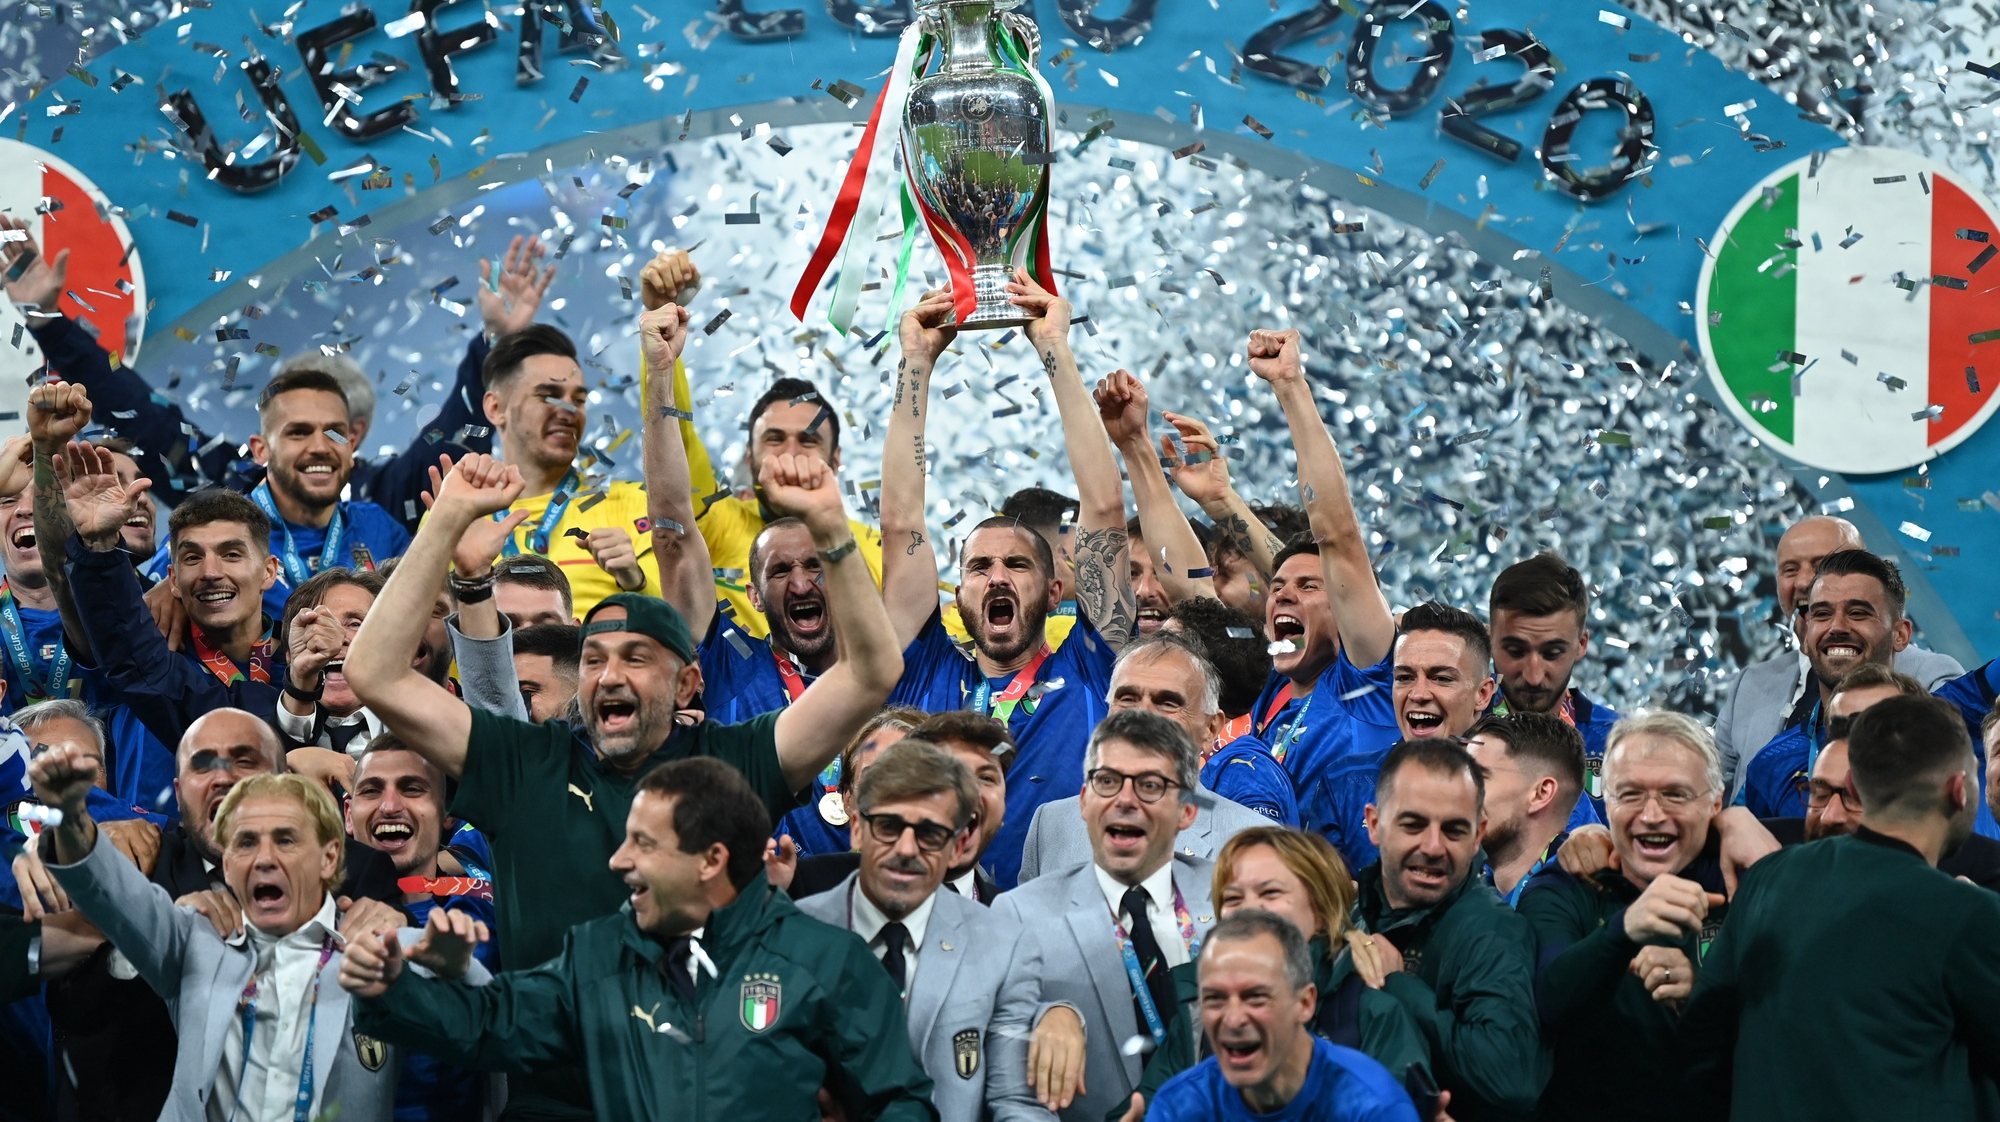 epa09339258 Players of Italy celebrate after winning the UEFA EURO 2020 final between Italy and England in London, Britain, 11 July 2021.  EPA/Michael Regan / POOL (RESTRICTIONS: For editorial news reporting purposes only. Images must appear as still images and must not emulate match action video footage. Photographs published in online publications shall have an interval of at least 20 seconds between the posting.)